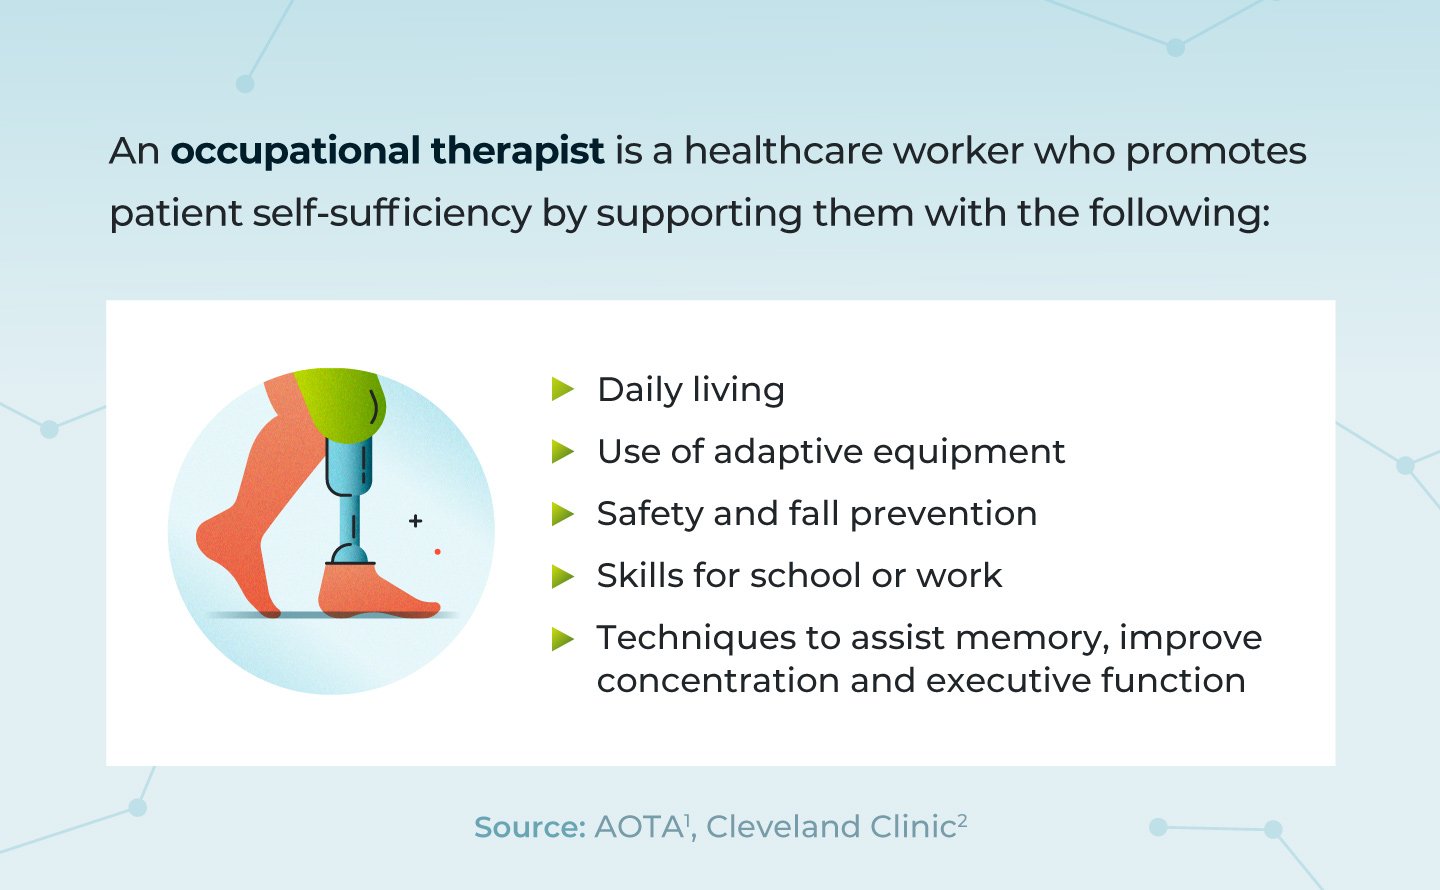 Description of what an occupational therapist is.